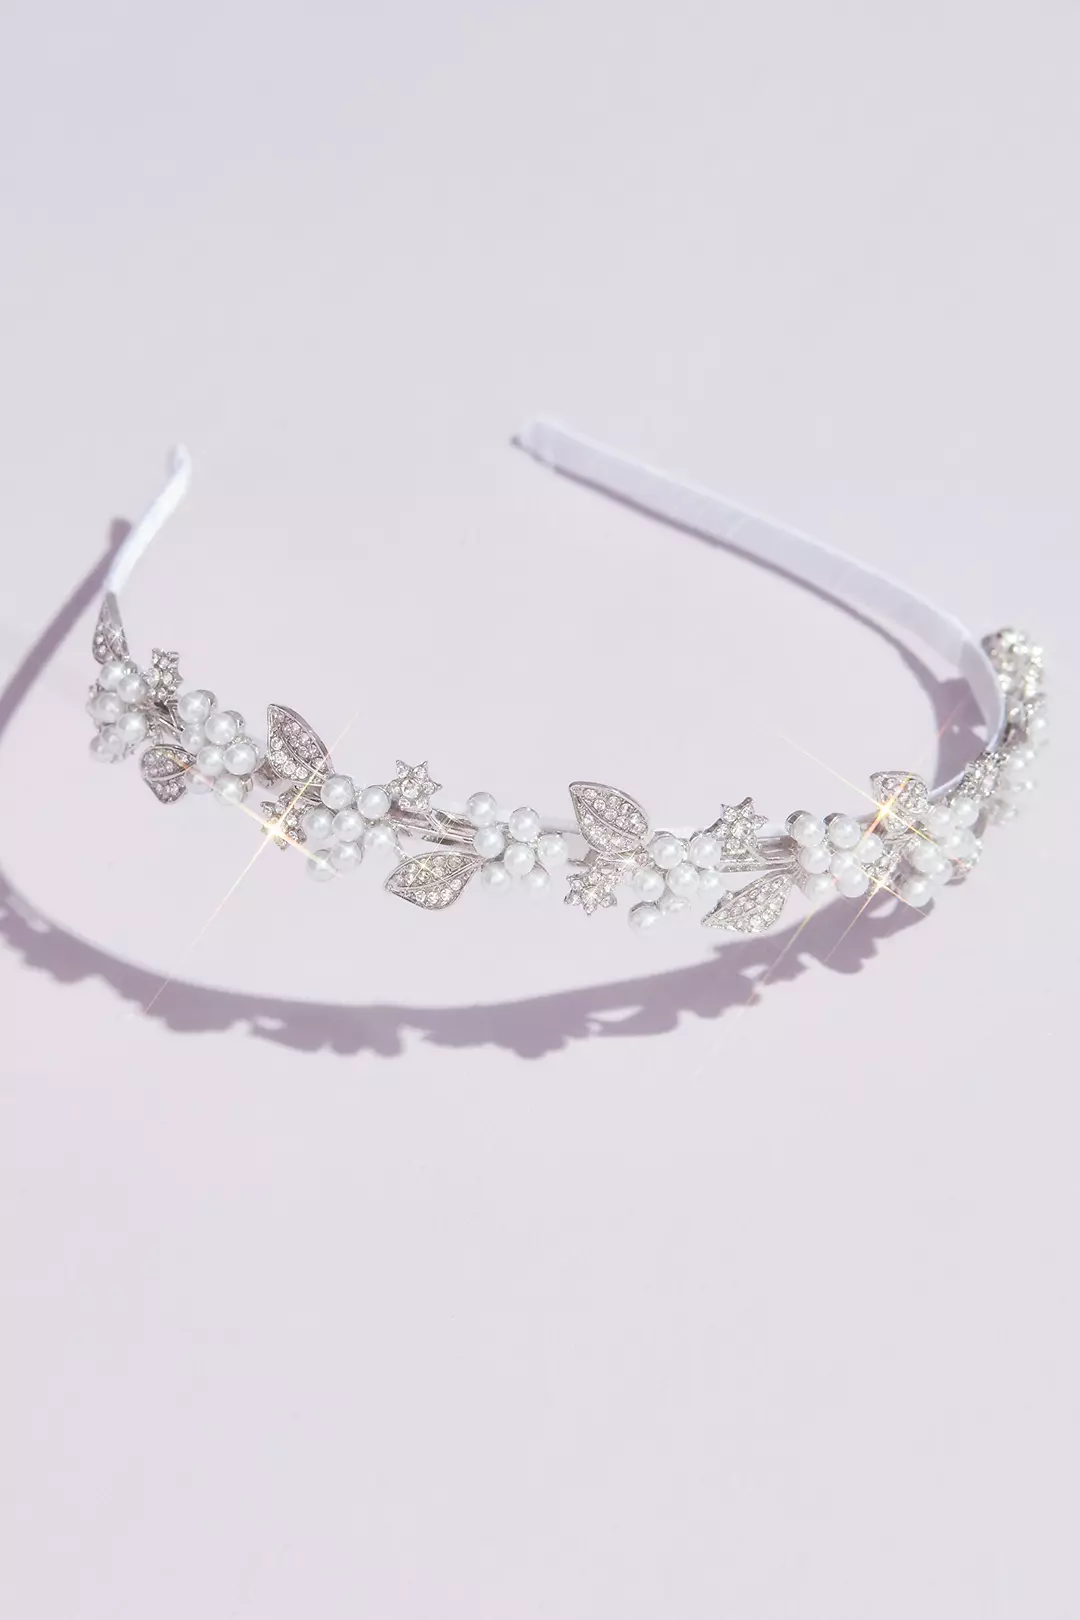 Petite Pearl Flower Headband with Crystals Image